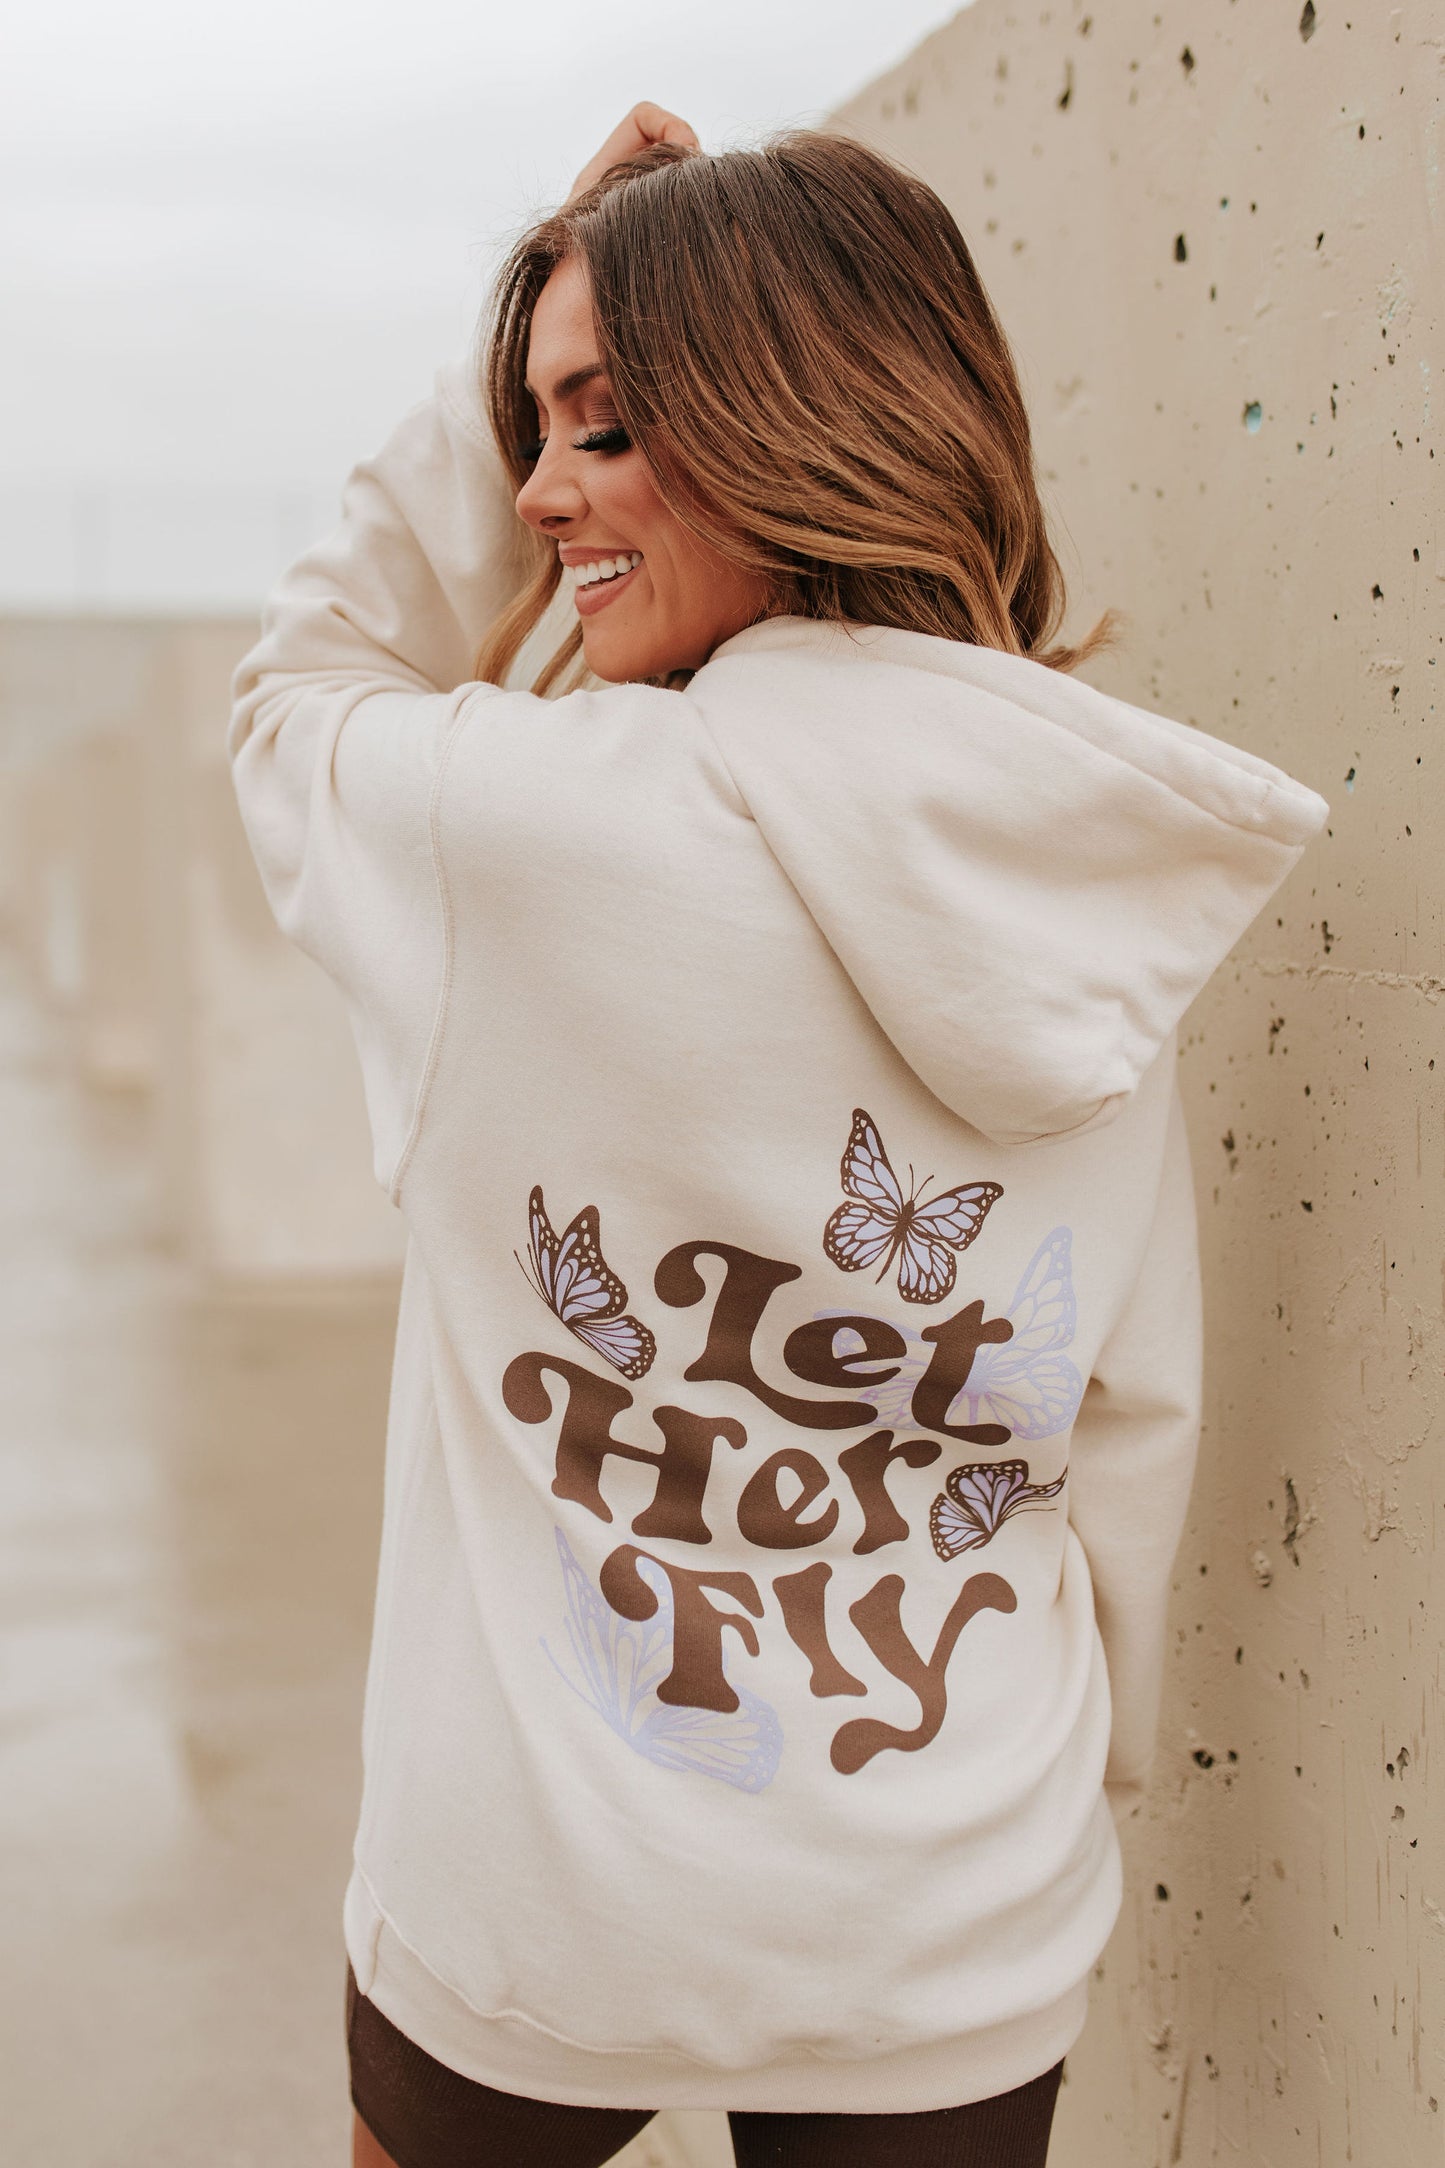 THE LET HER FLY BUTTERFLY HOODIE IN NATURAL BY PINK DESERT